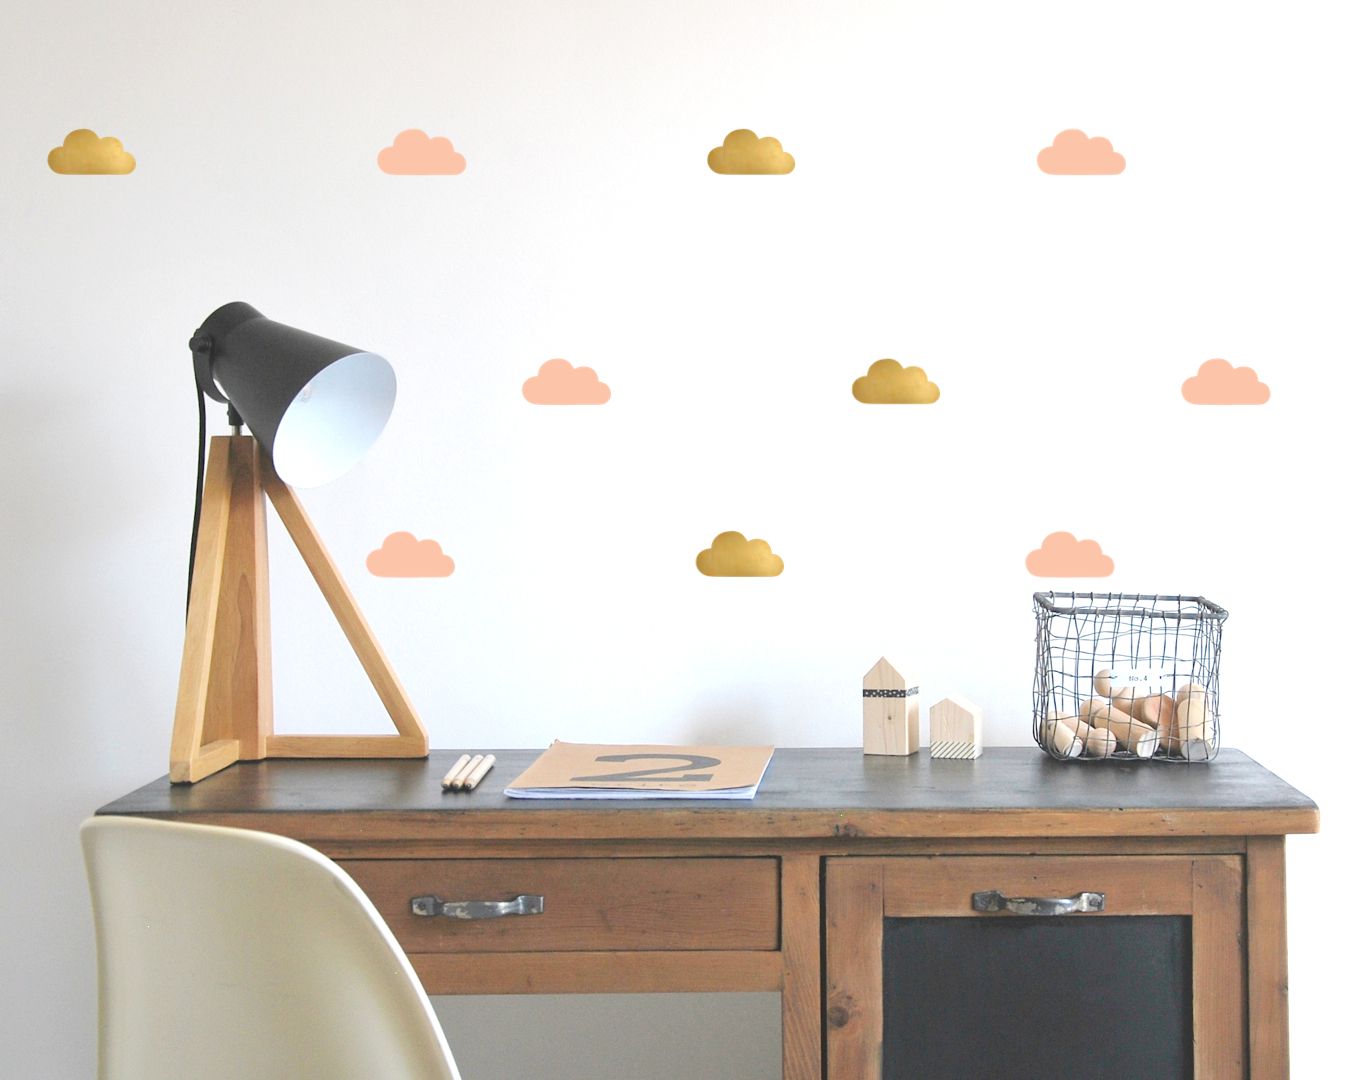 Repositionable cloud decals from France help bring life to a blank wall and reposition easily